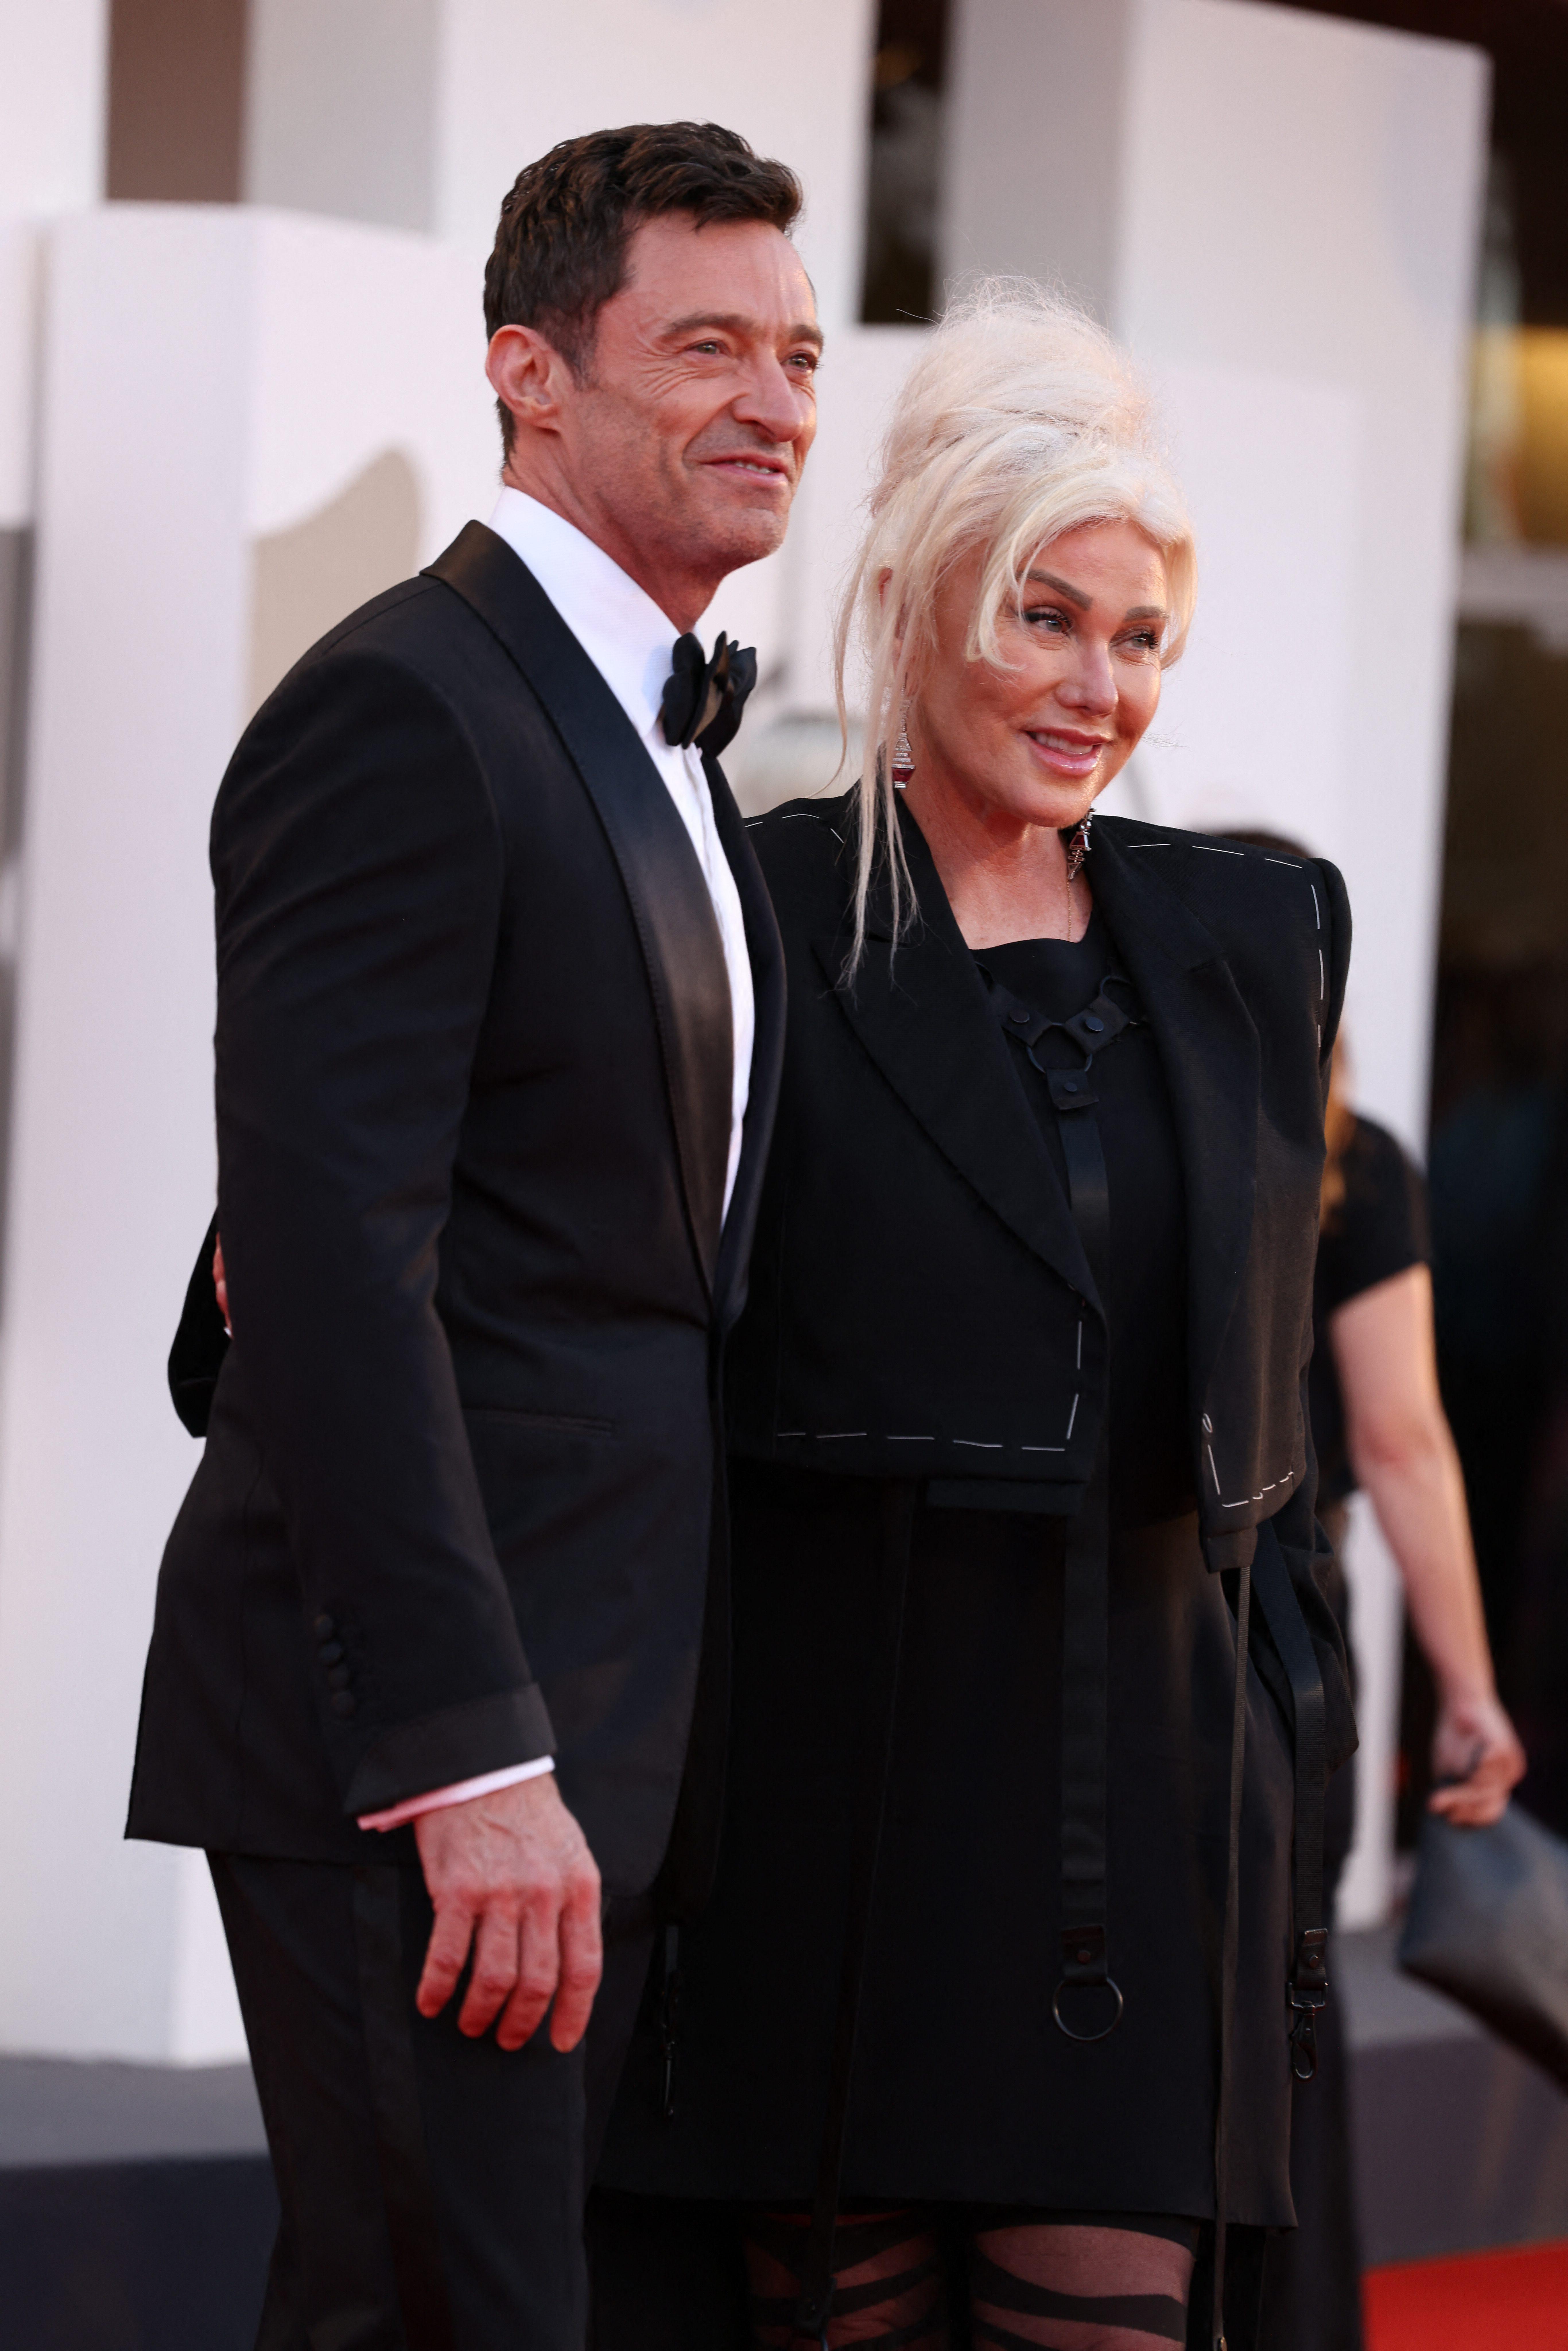 Hugh Jackman and Deborra-Lee Furness attend "The Son" red carpet at the 79th Venice International Film Festival